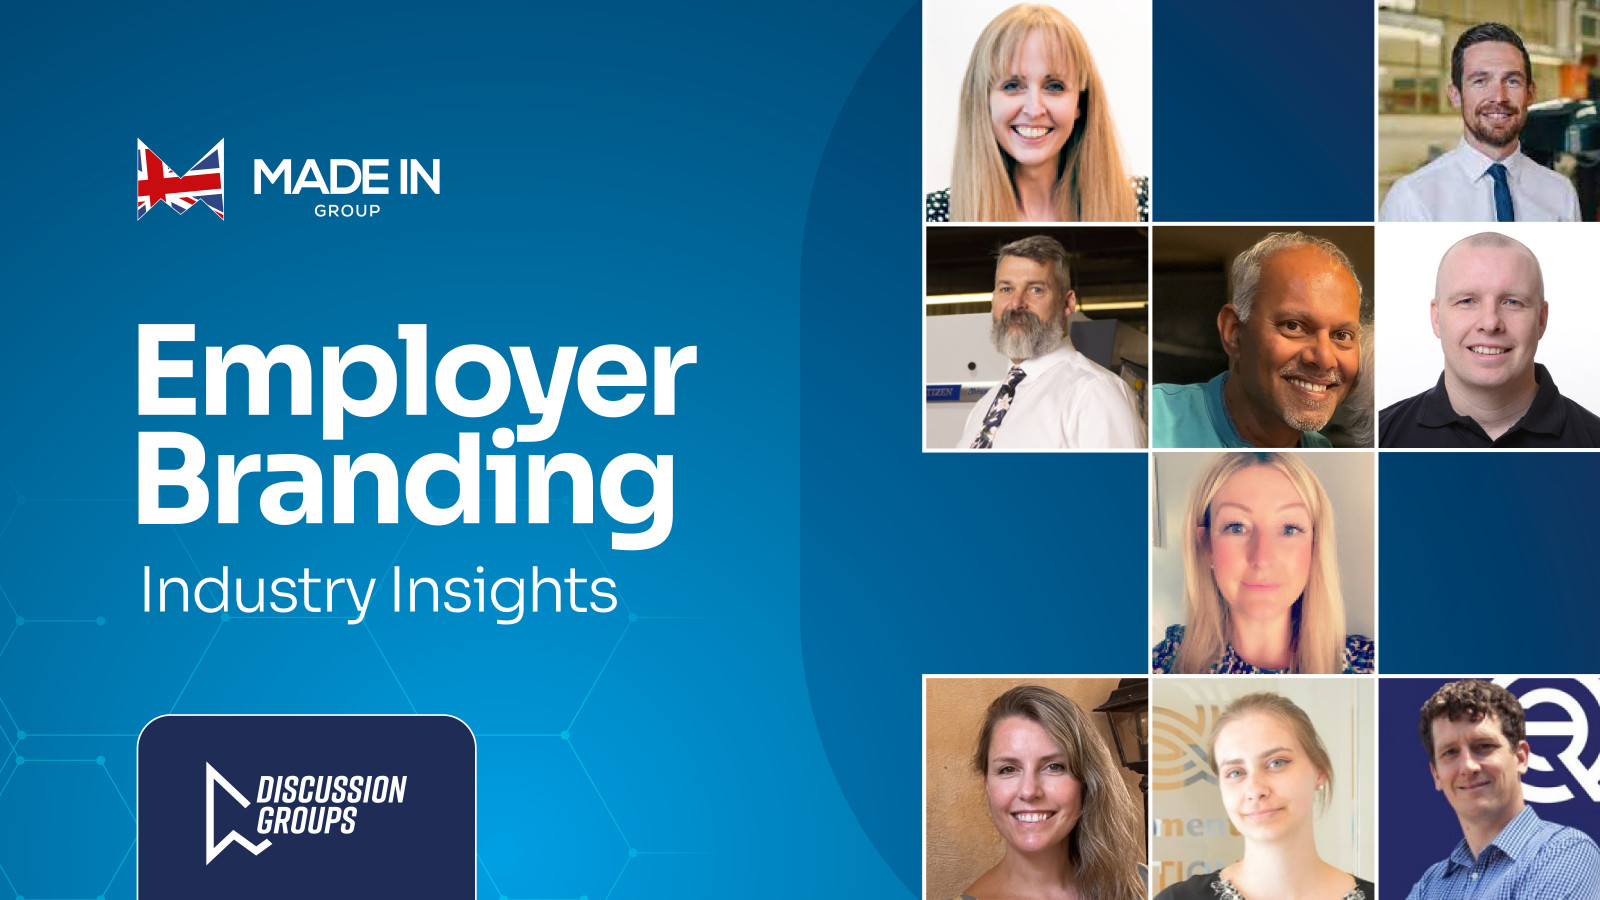 Manufacturing & Engineering: Insights on Talent & Diversity